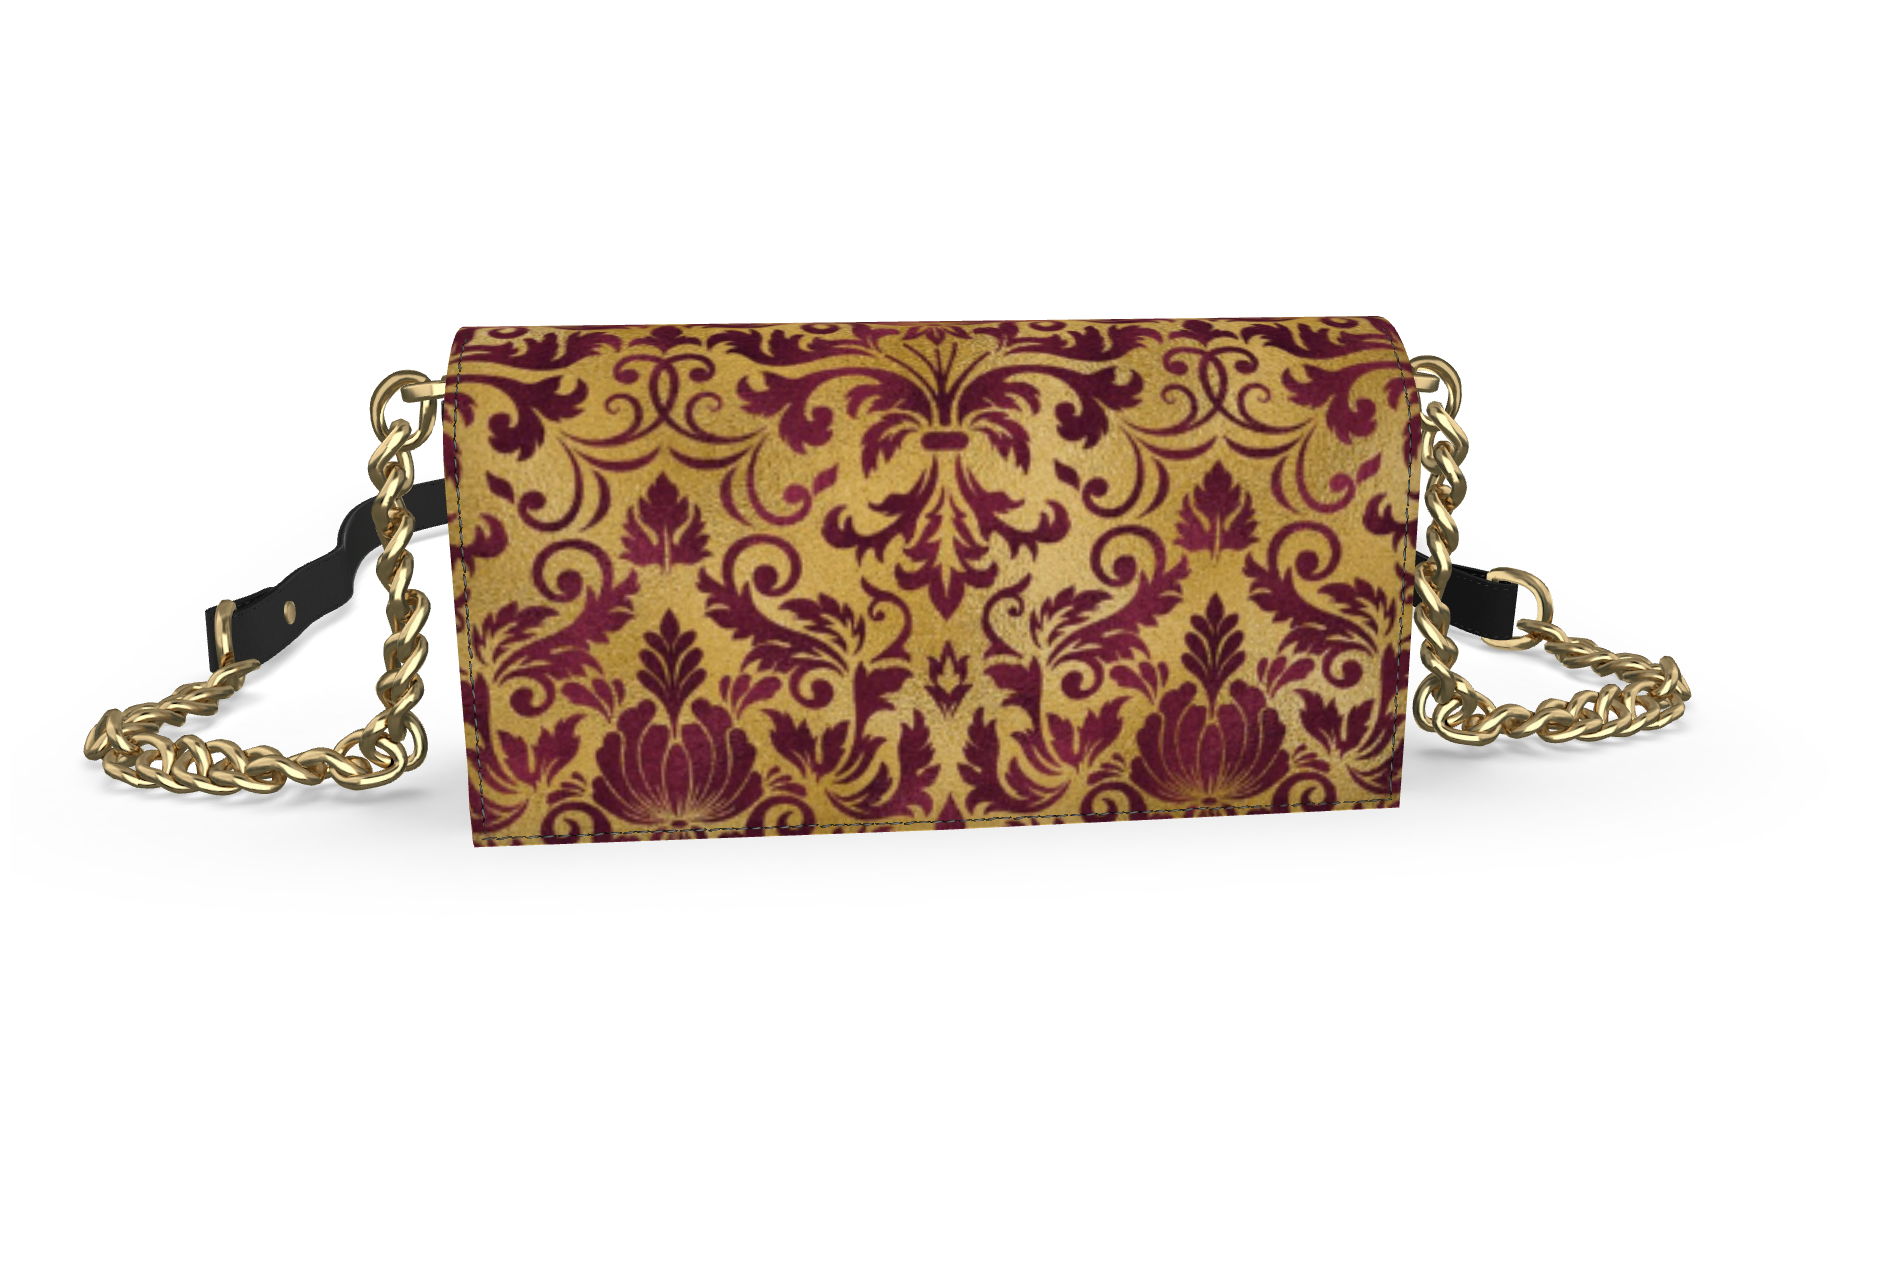 Gold and Maroon Damask Fold over bag in Nappa Leather